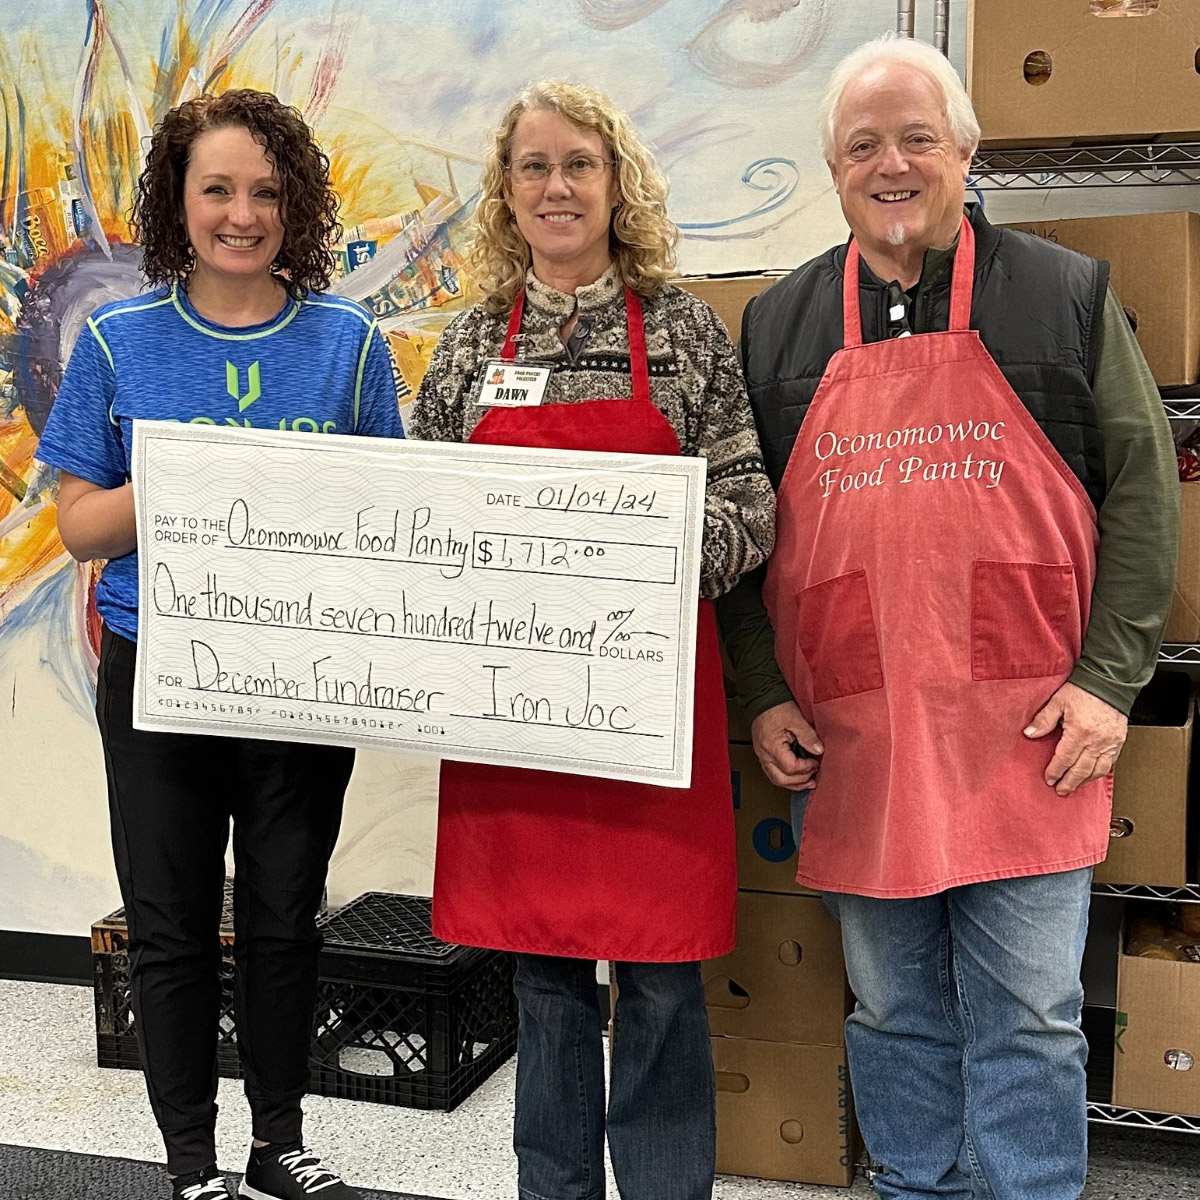 All because of you! In Dec. we ran a promotion where a % of all Iron Joc sales went to the Oconomowoc Food Pantry. Last week our VP of Customer Service Tash presented the check, helping families in need.

We definitely have plans to do this again + increase the donation amounts!